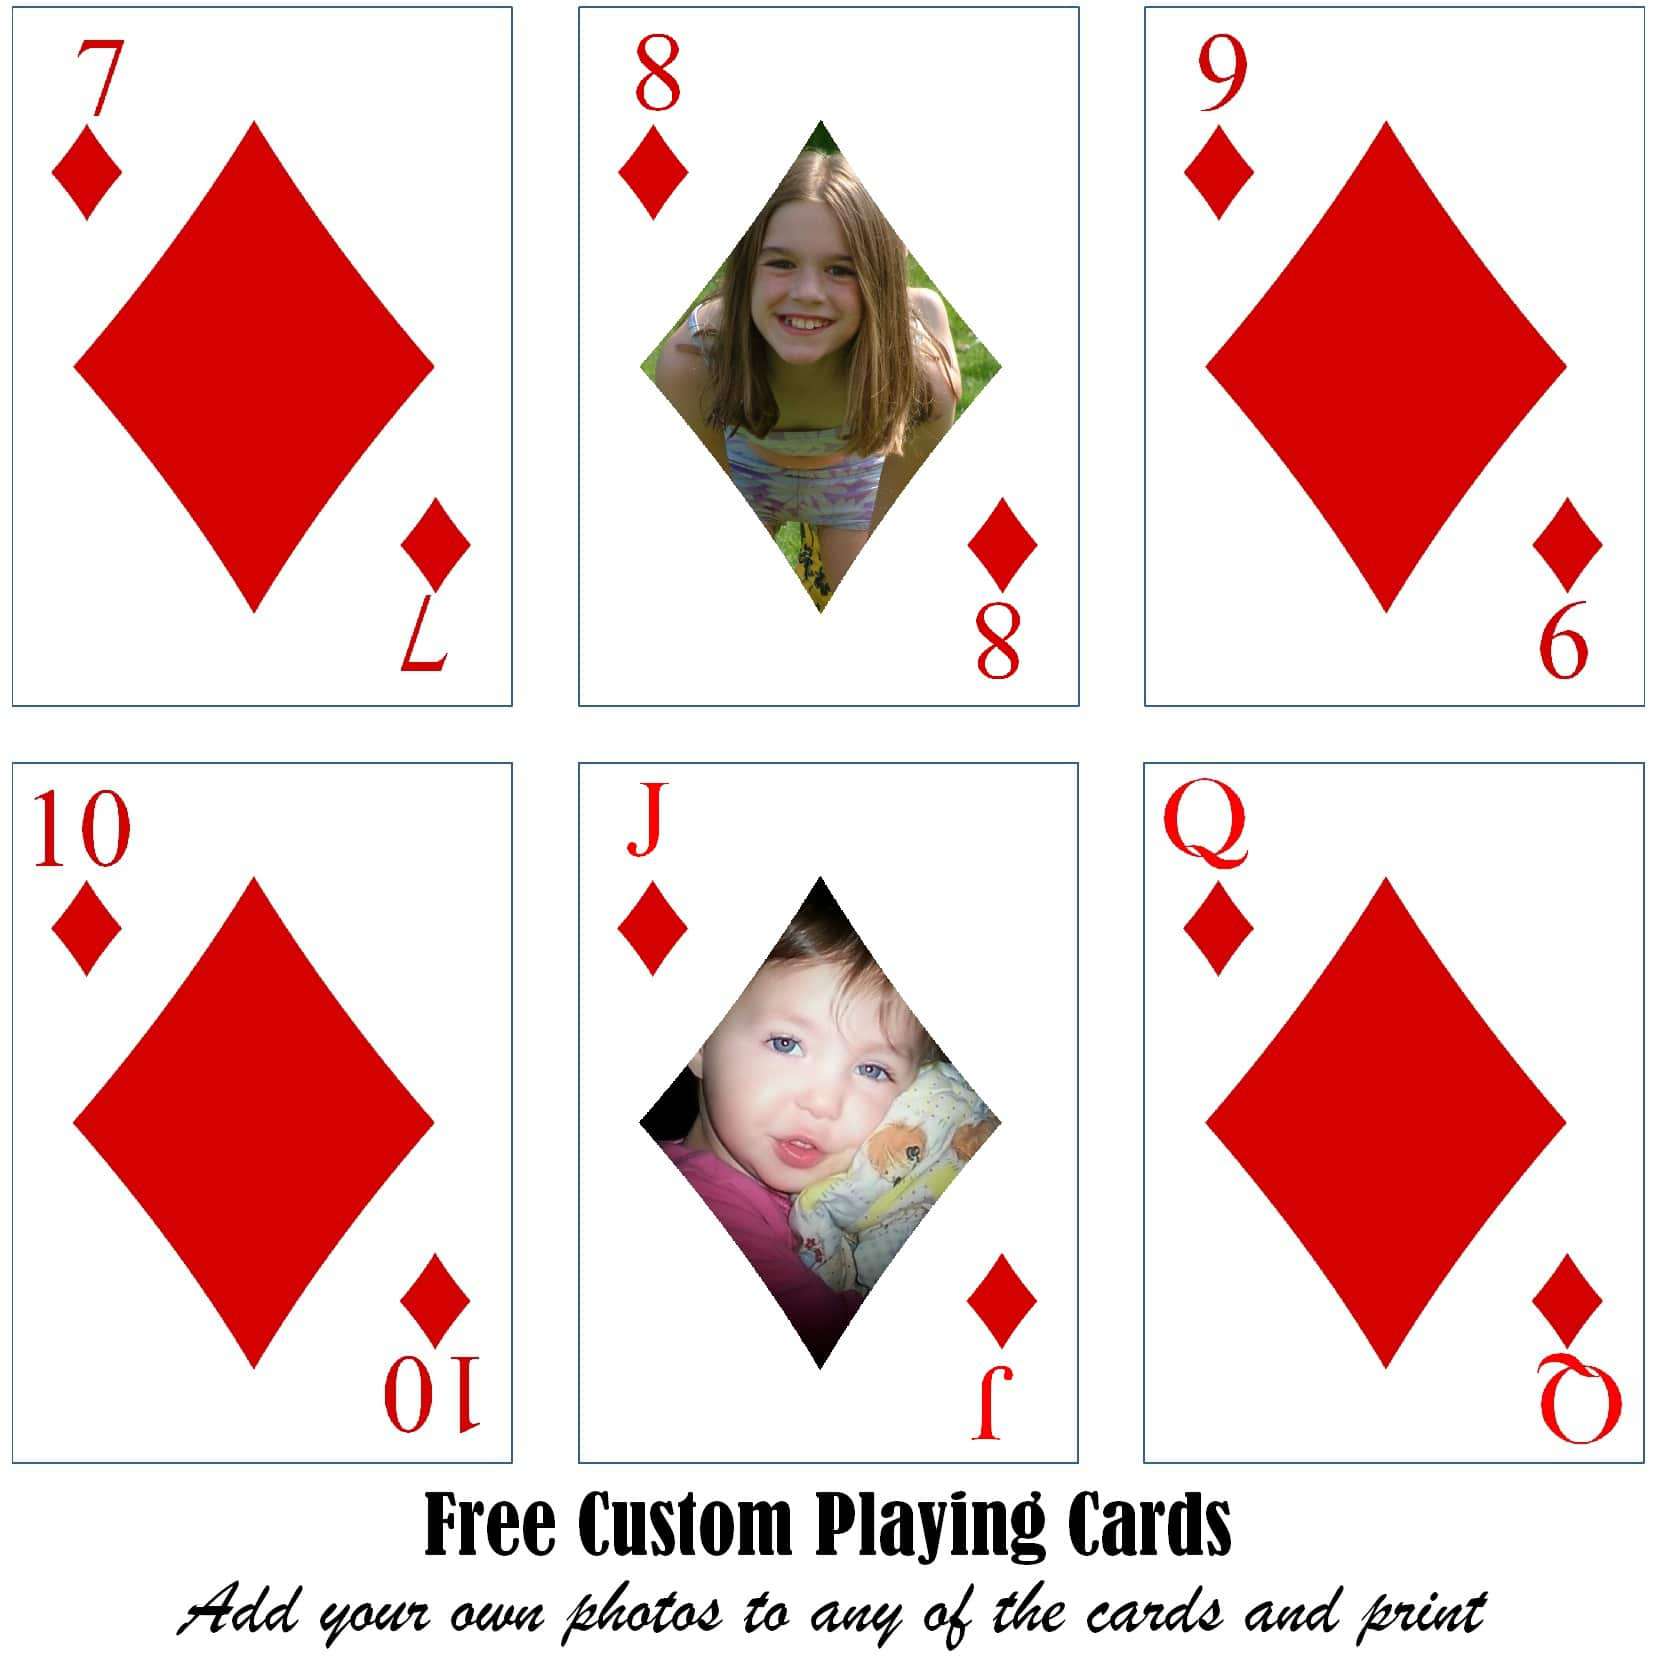 Playing cards - complete  Printable playing cards, Custom playing cards, Playing  cards design